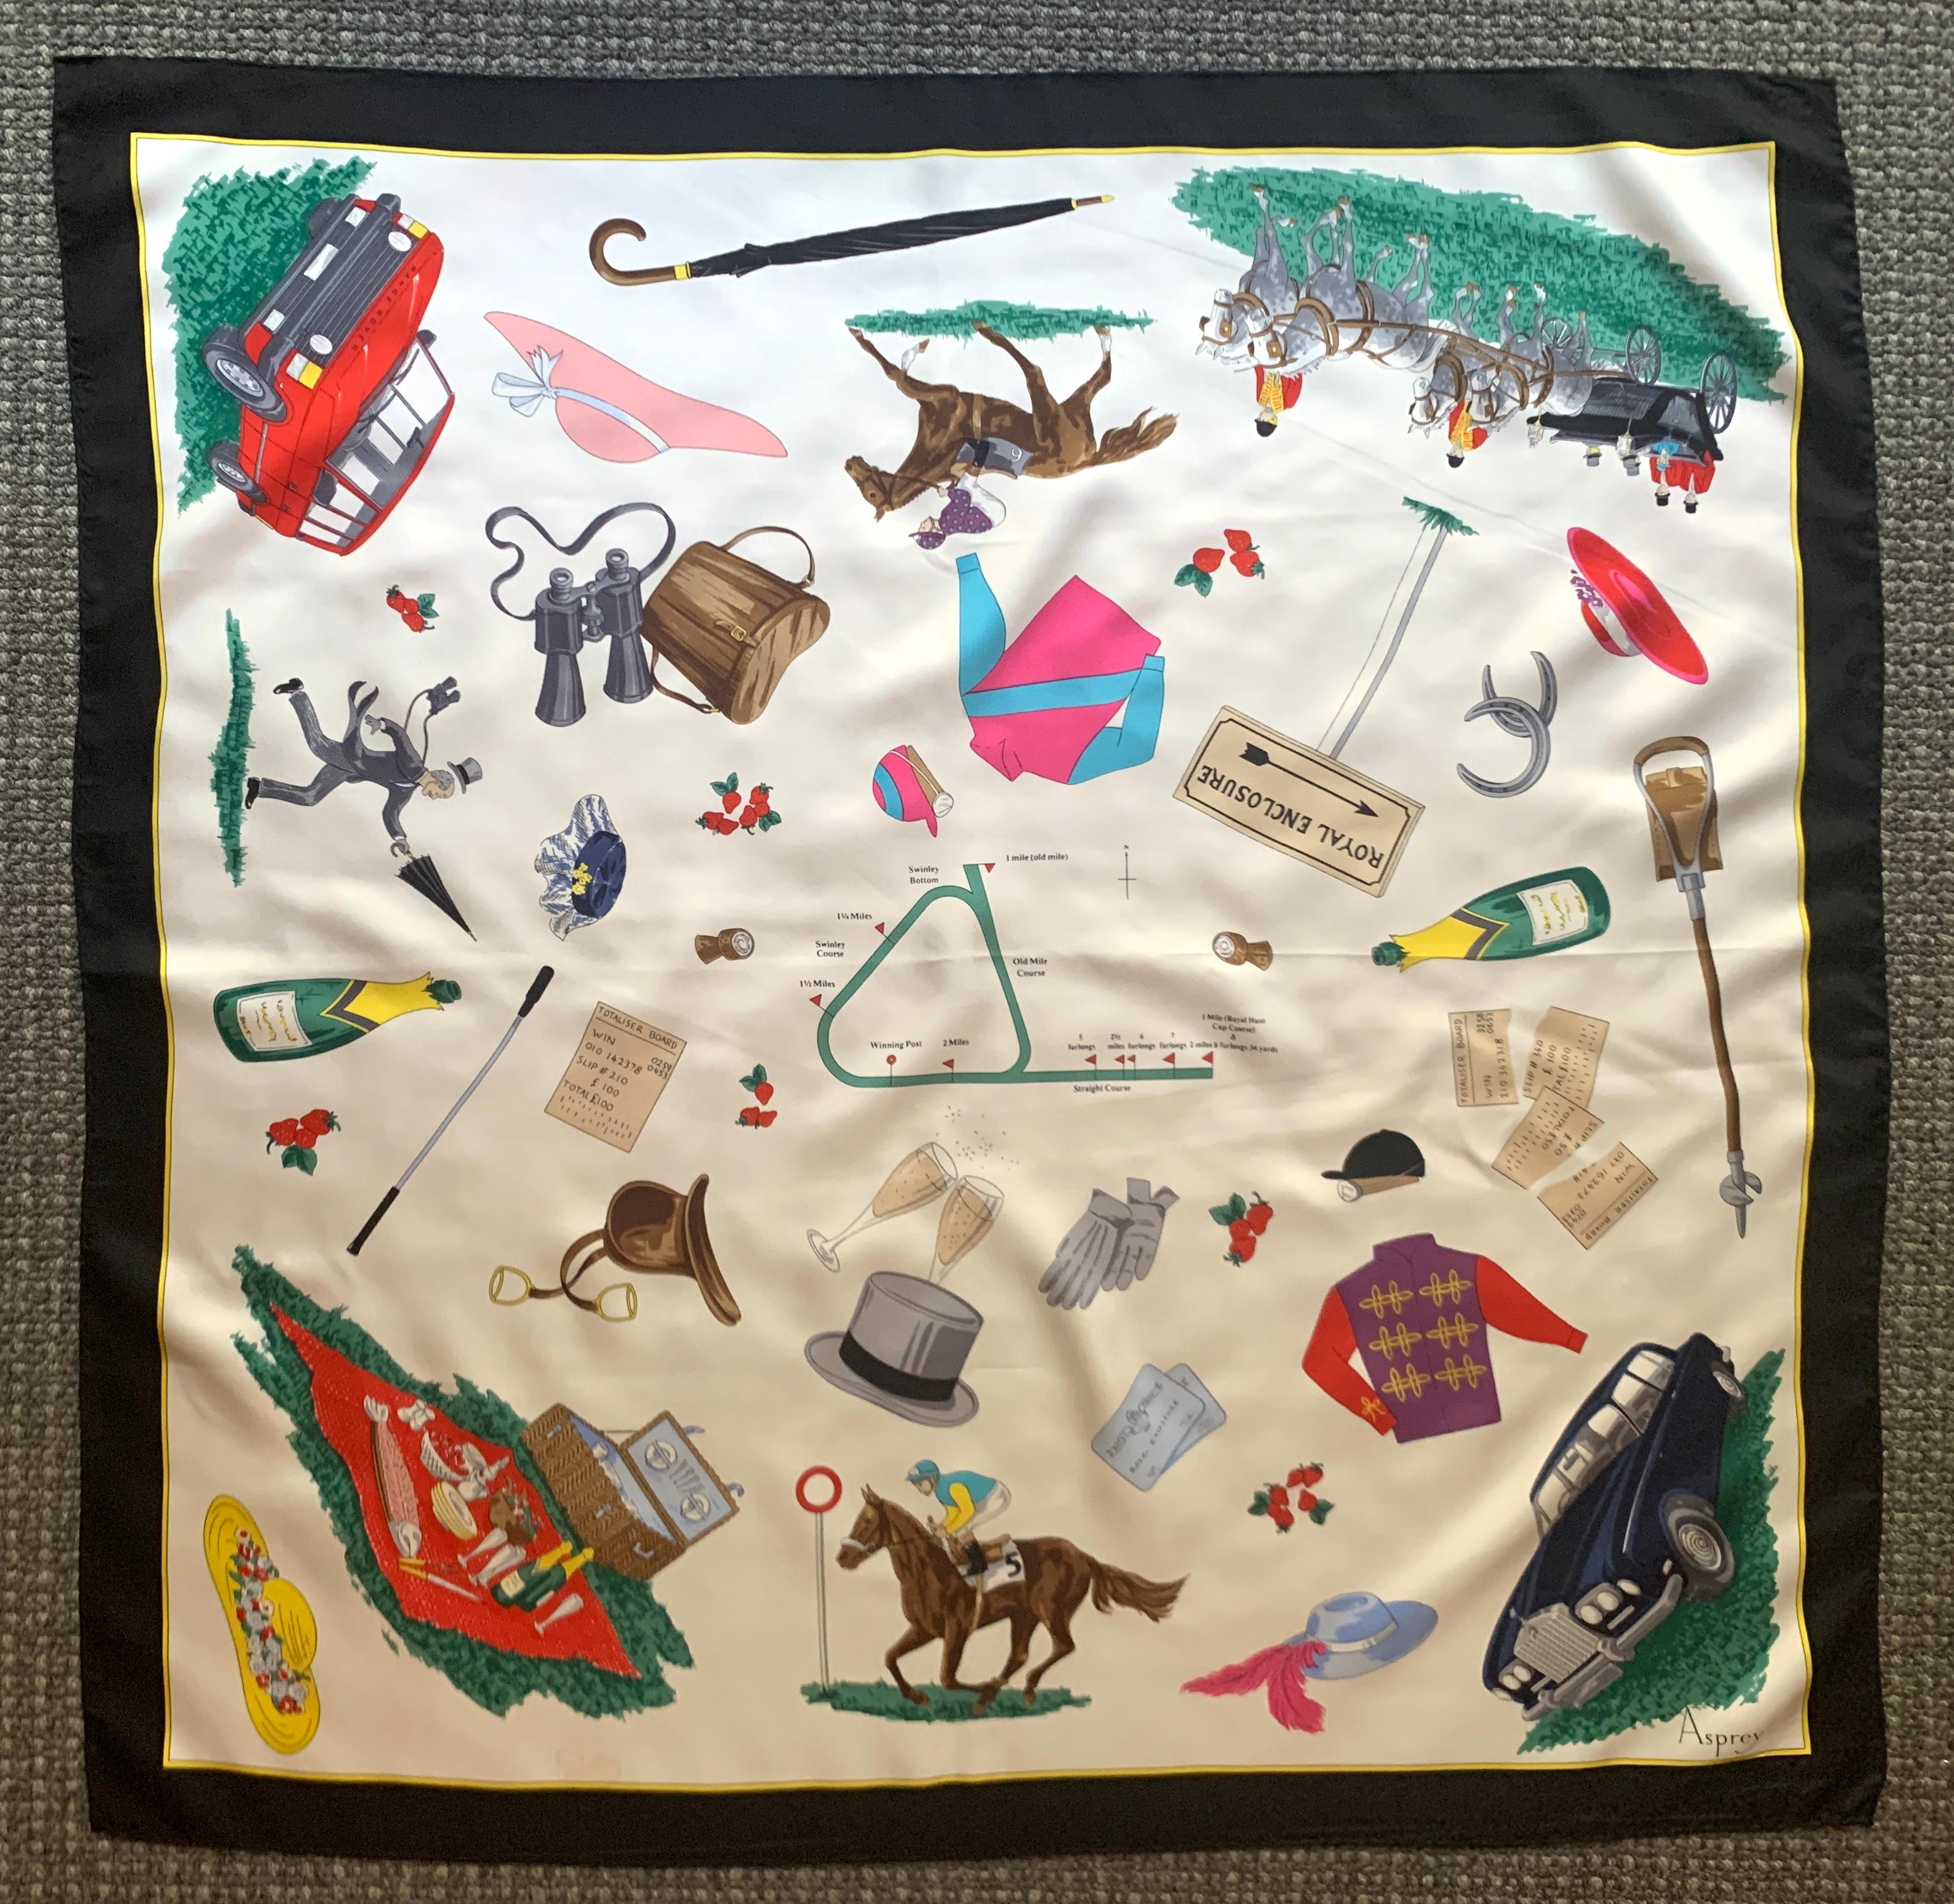 Asprey silk scarf with equestrian racing motif highlights all the best parts of Ascot. Spectators, picnics, champagne, equestrian garb, and even tickets and directions to the Royal Enclosure are scattered throughout. Signed 'Asprey' at bottom